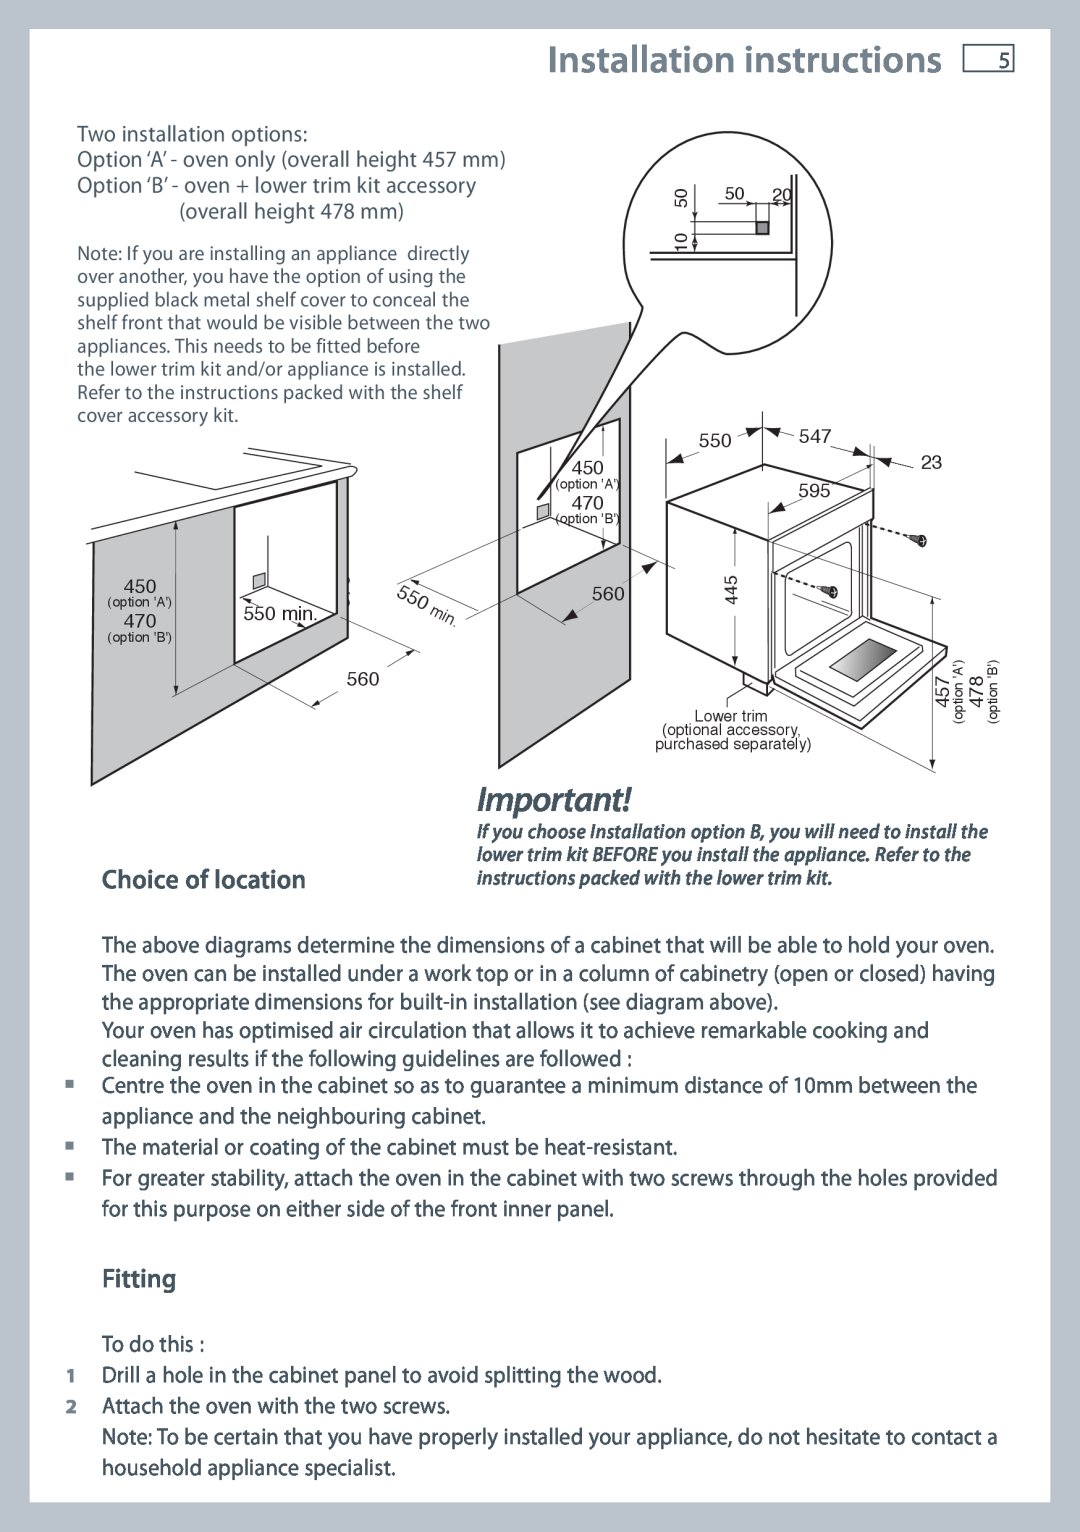 Fisher & Paykel OB60N8DTX installation instructions Installation instructions, Choice of location, Fitting 